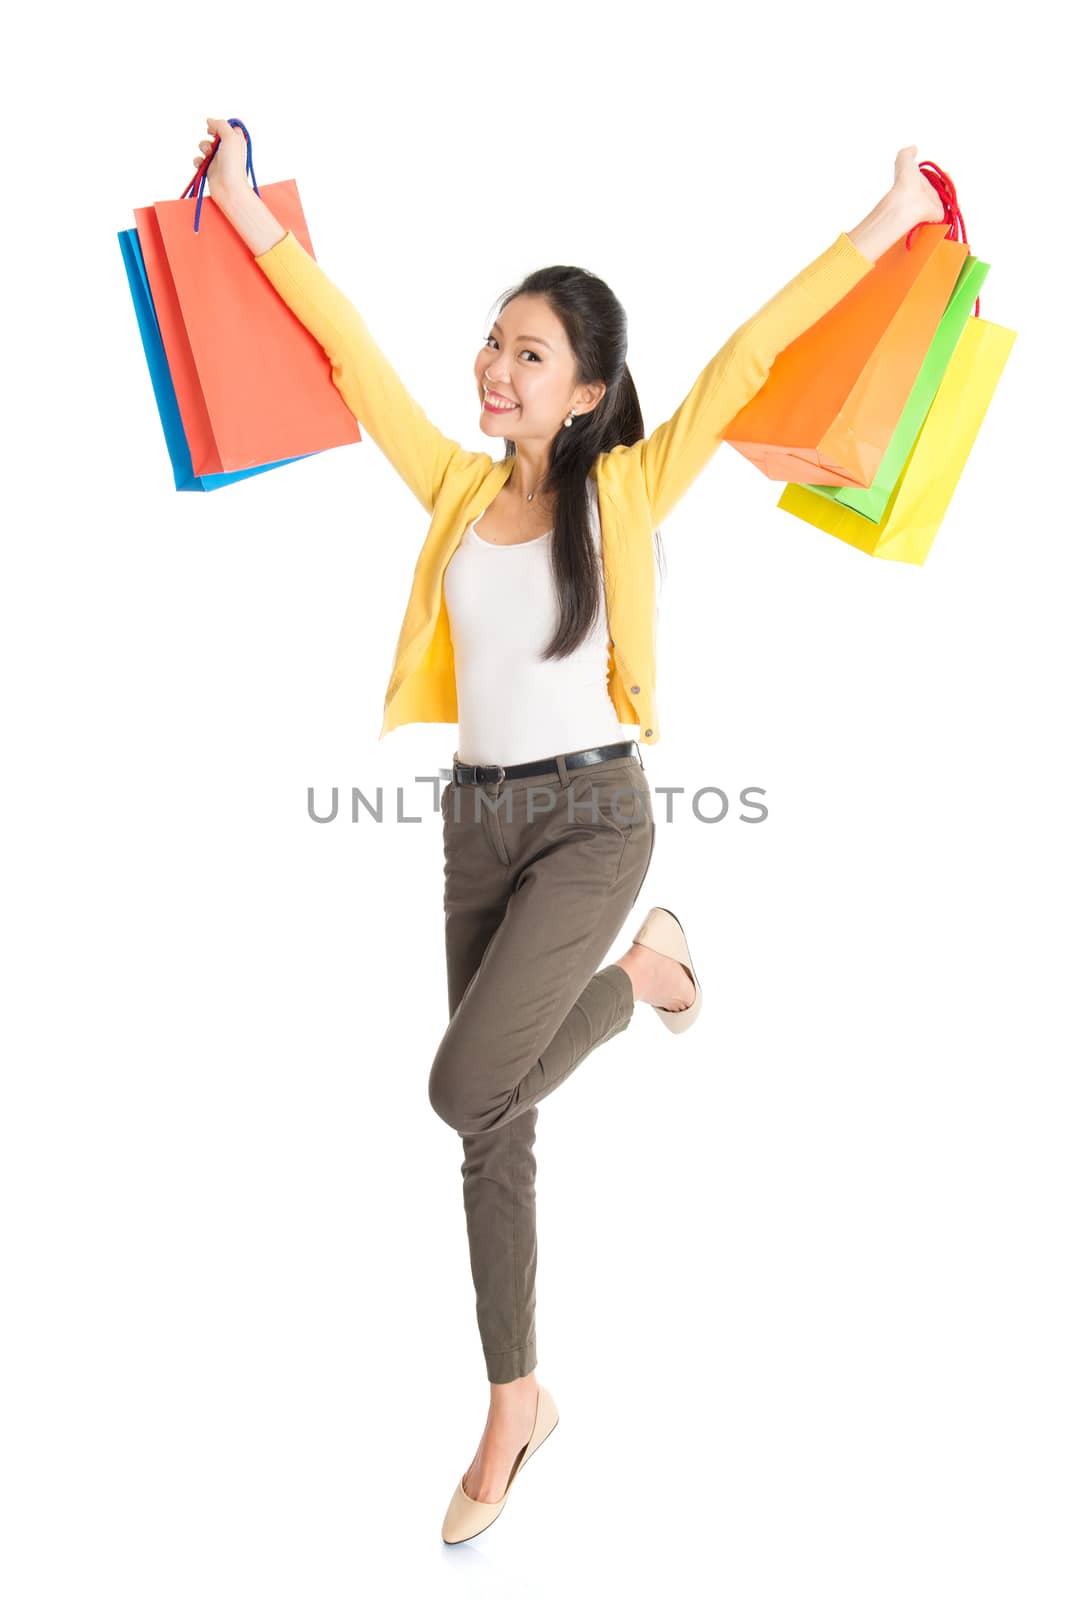 Happy young Asian woman shopper jumping, hands outstretched holding shopping bags and smiling, full length isolated standing on white background.